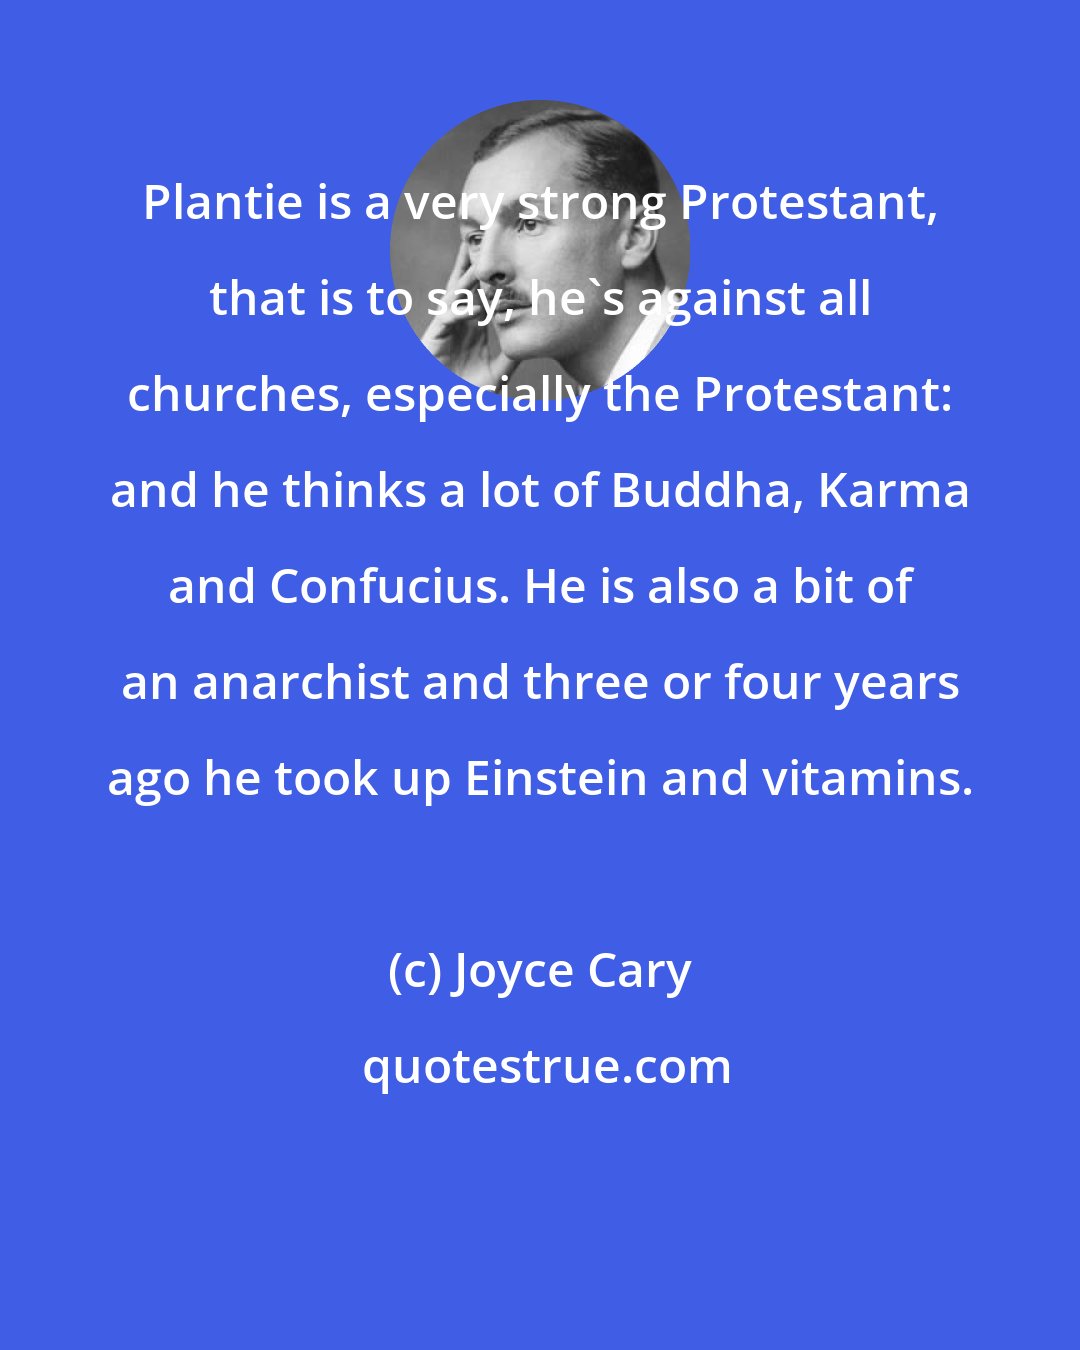 Joyce Cary: Plantie is a very strong Protestant, that is to say, he's against all churches, especially the Protestant: and he thinks a lot of Buddha, Karma and Confucius. He is also a bit of an anarchist and three or four years ago he took up Einstein and vitamins.